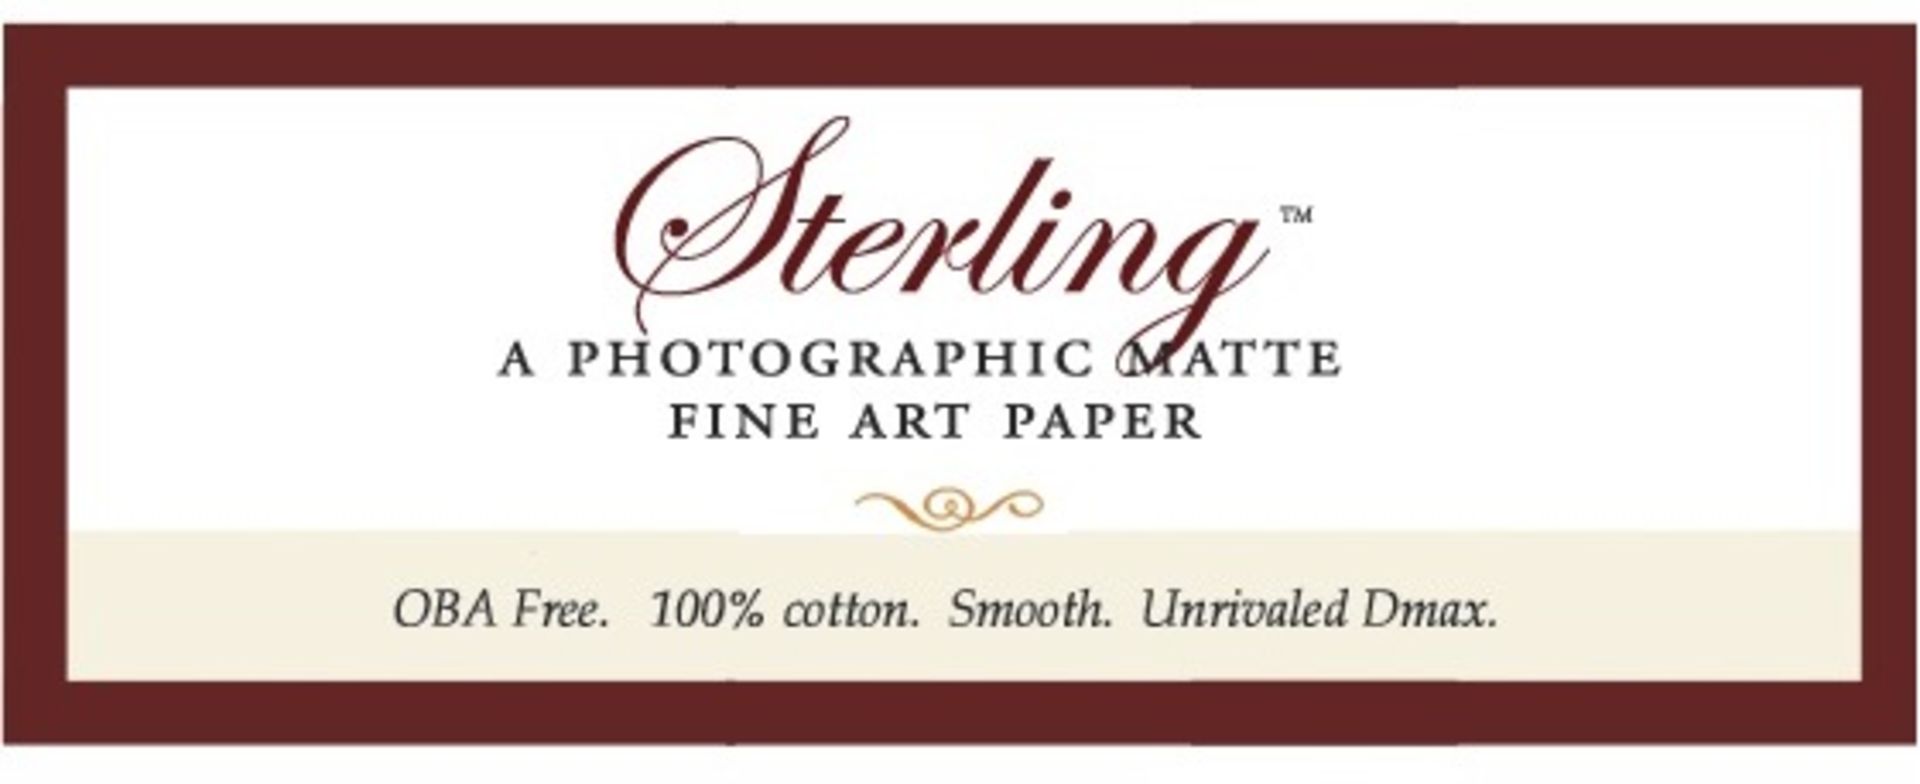 1 x Roll of Breathing Colour STERLING Photographic Matte Fine Art Paper - Size 24" x 40' - - Image 4 of 4